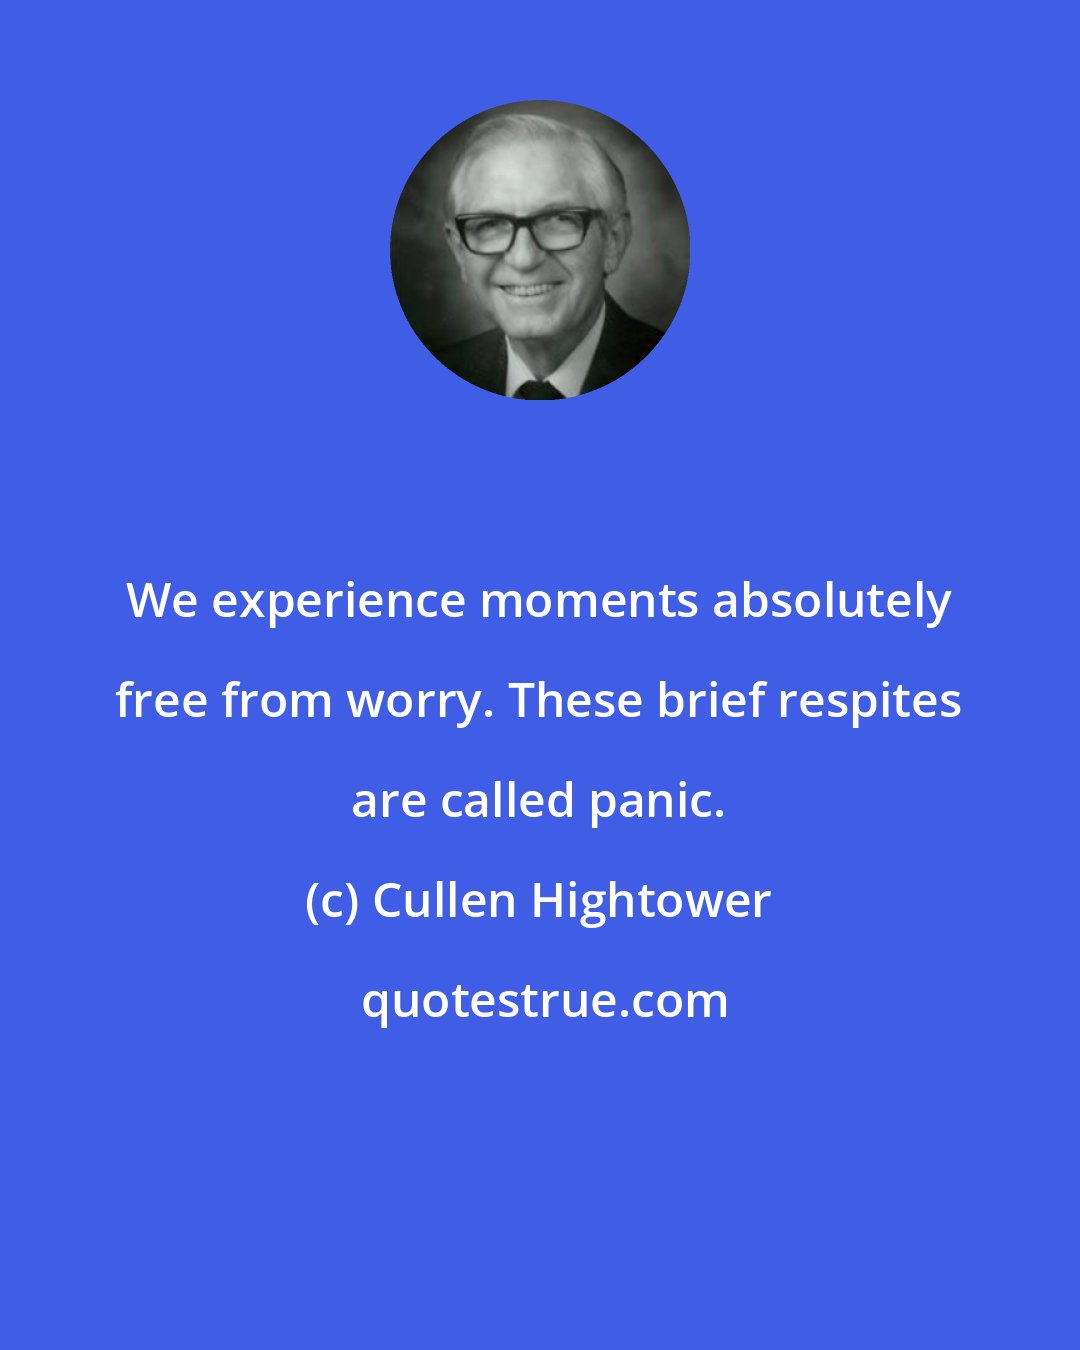 Cullen Hightower: We experience moments absolutely free from worry. These brief respites are called panic.